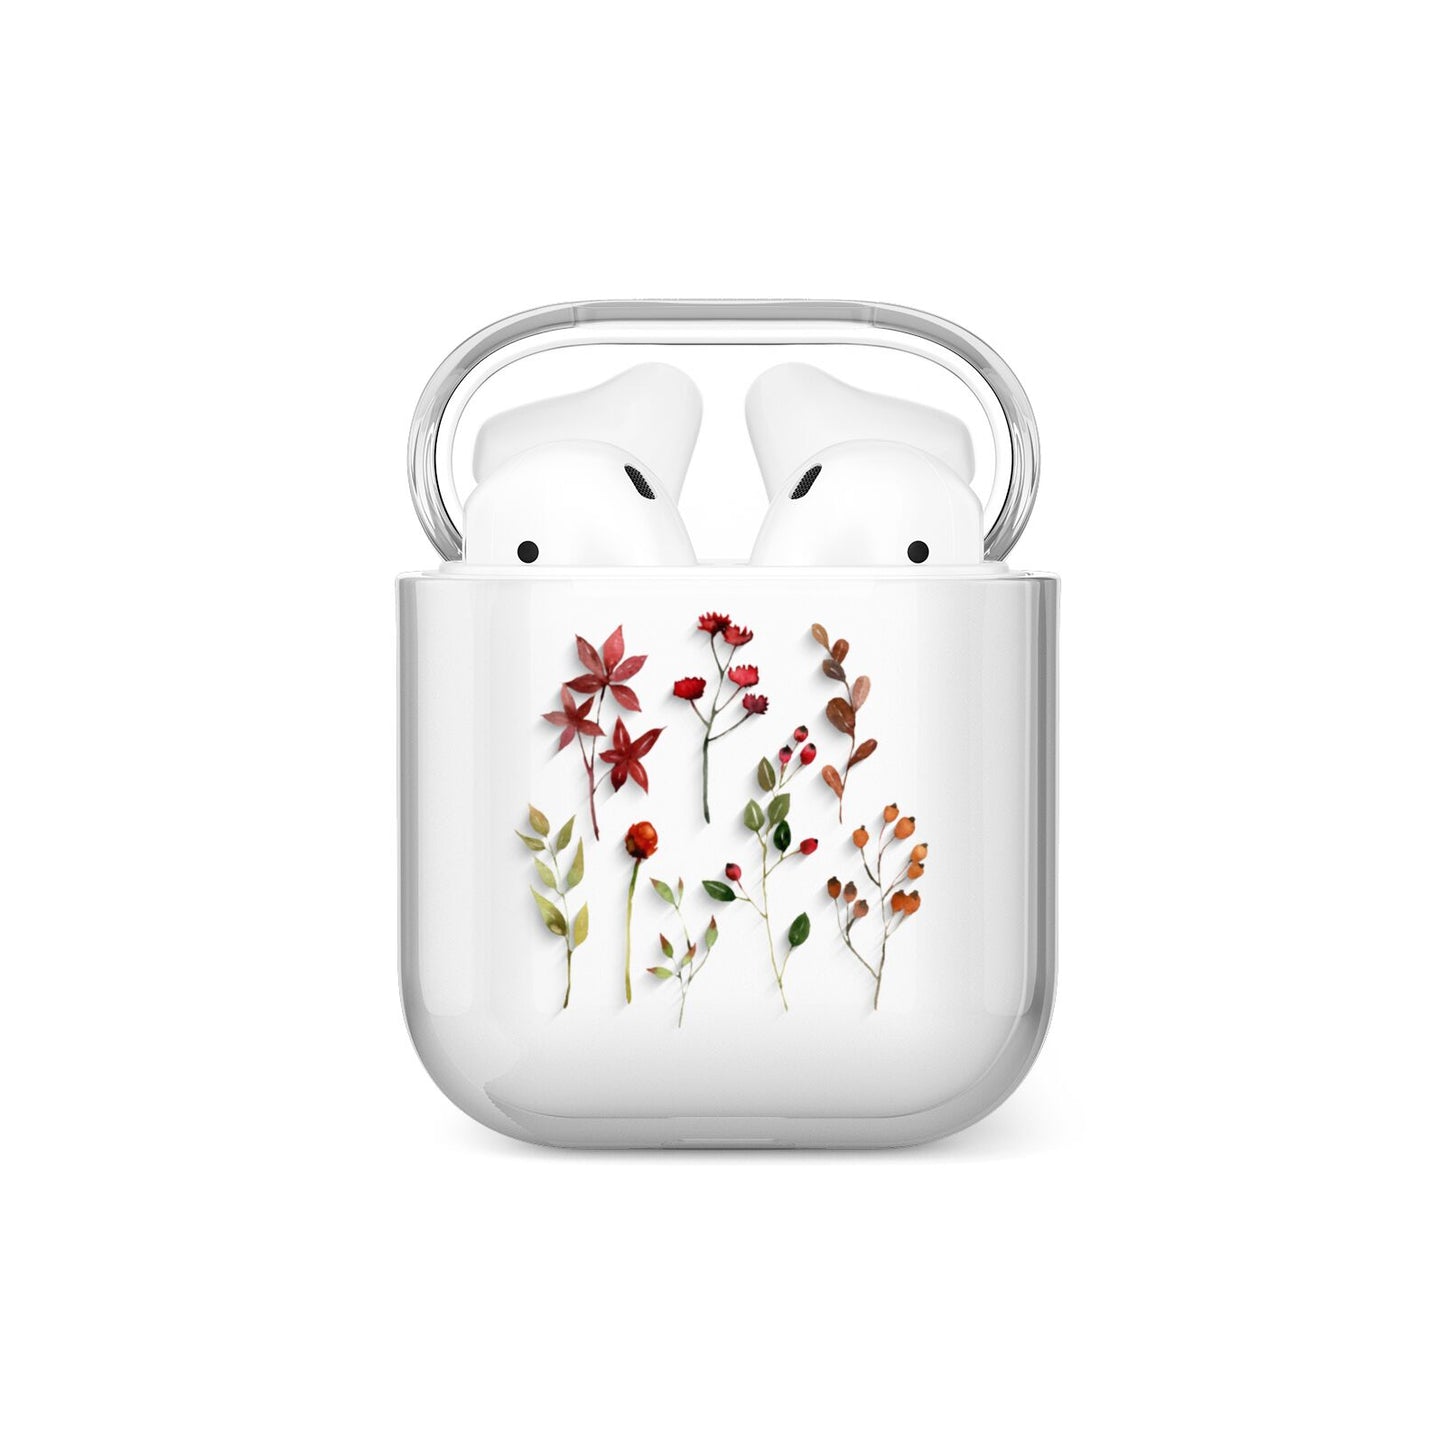 Watercolour Flowers and Foliage AirPods Case